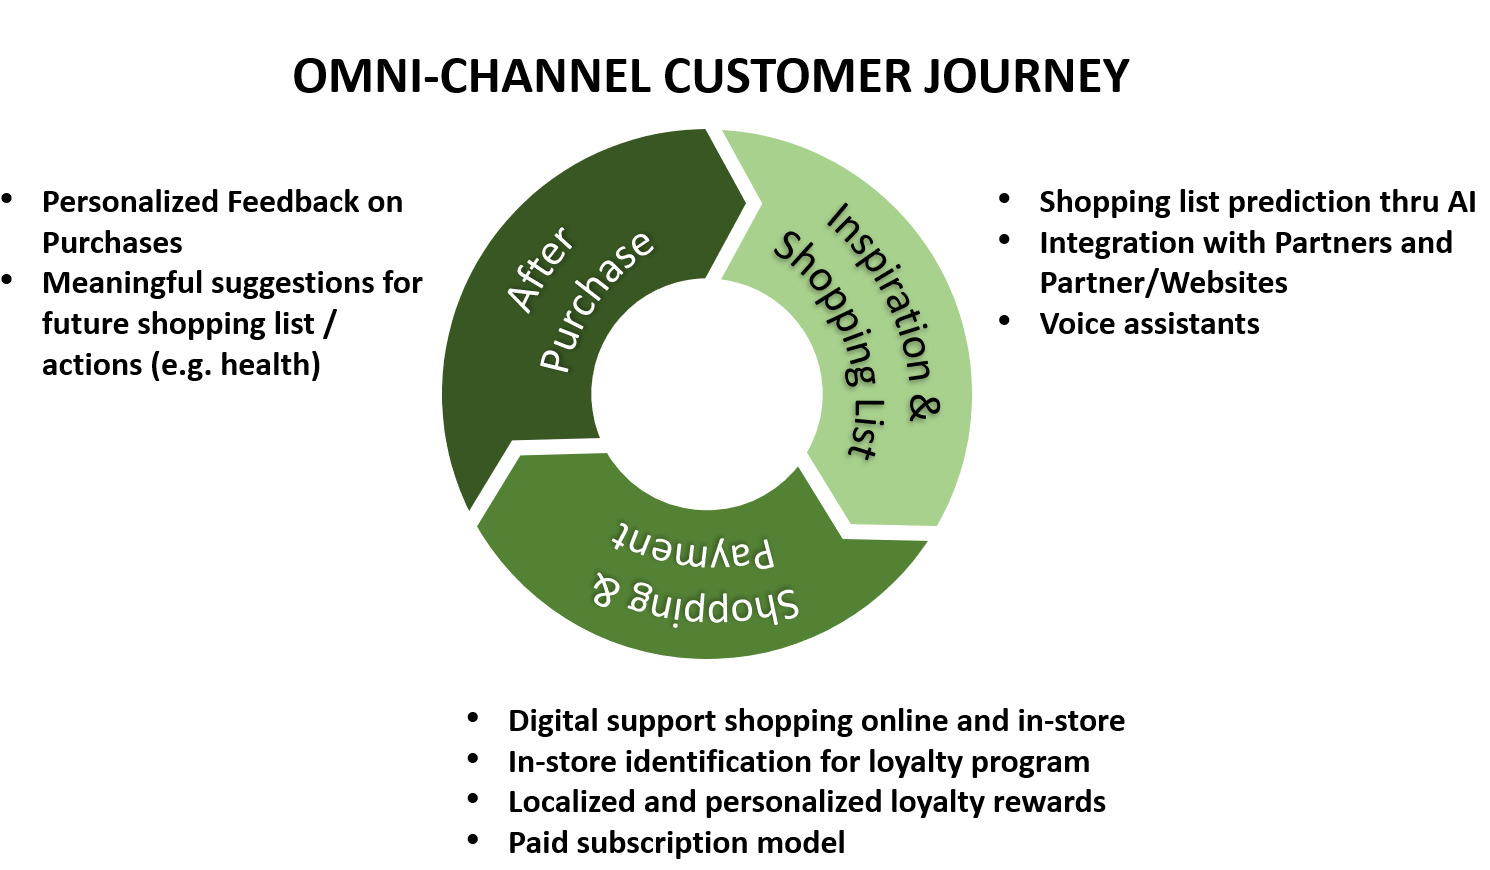 omnichannel customer journey and digitial enablers for omnichannel engagement and shopping